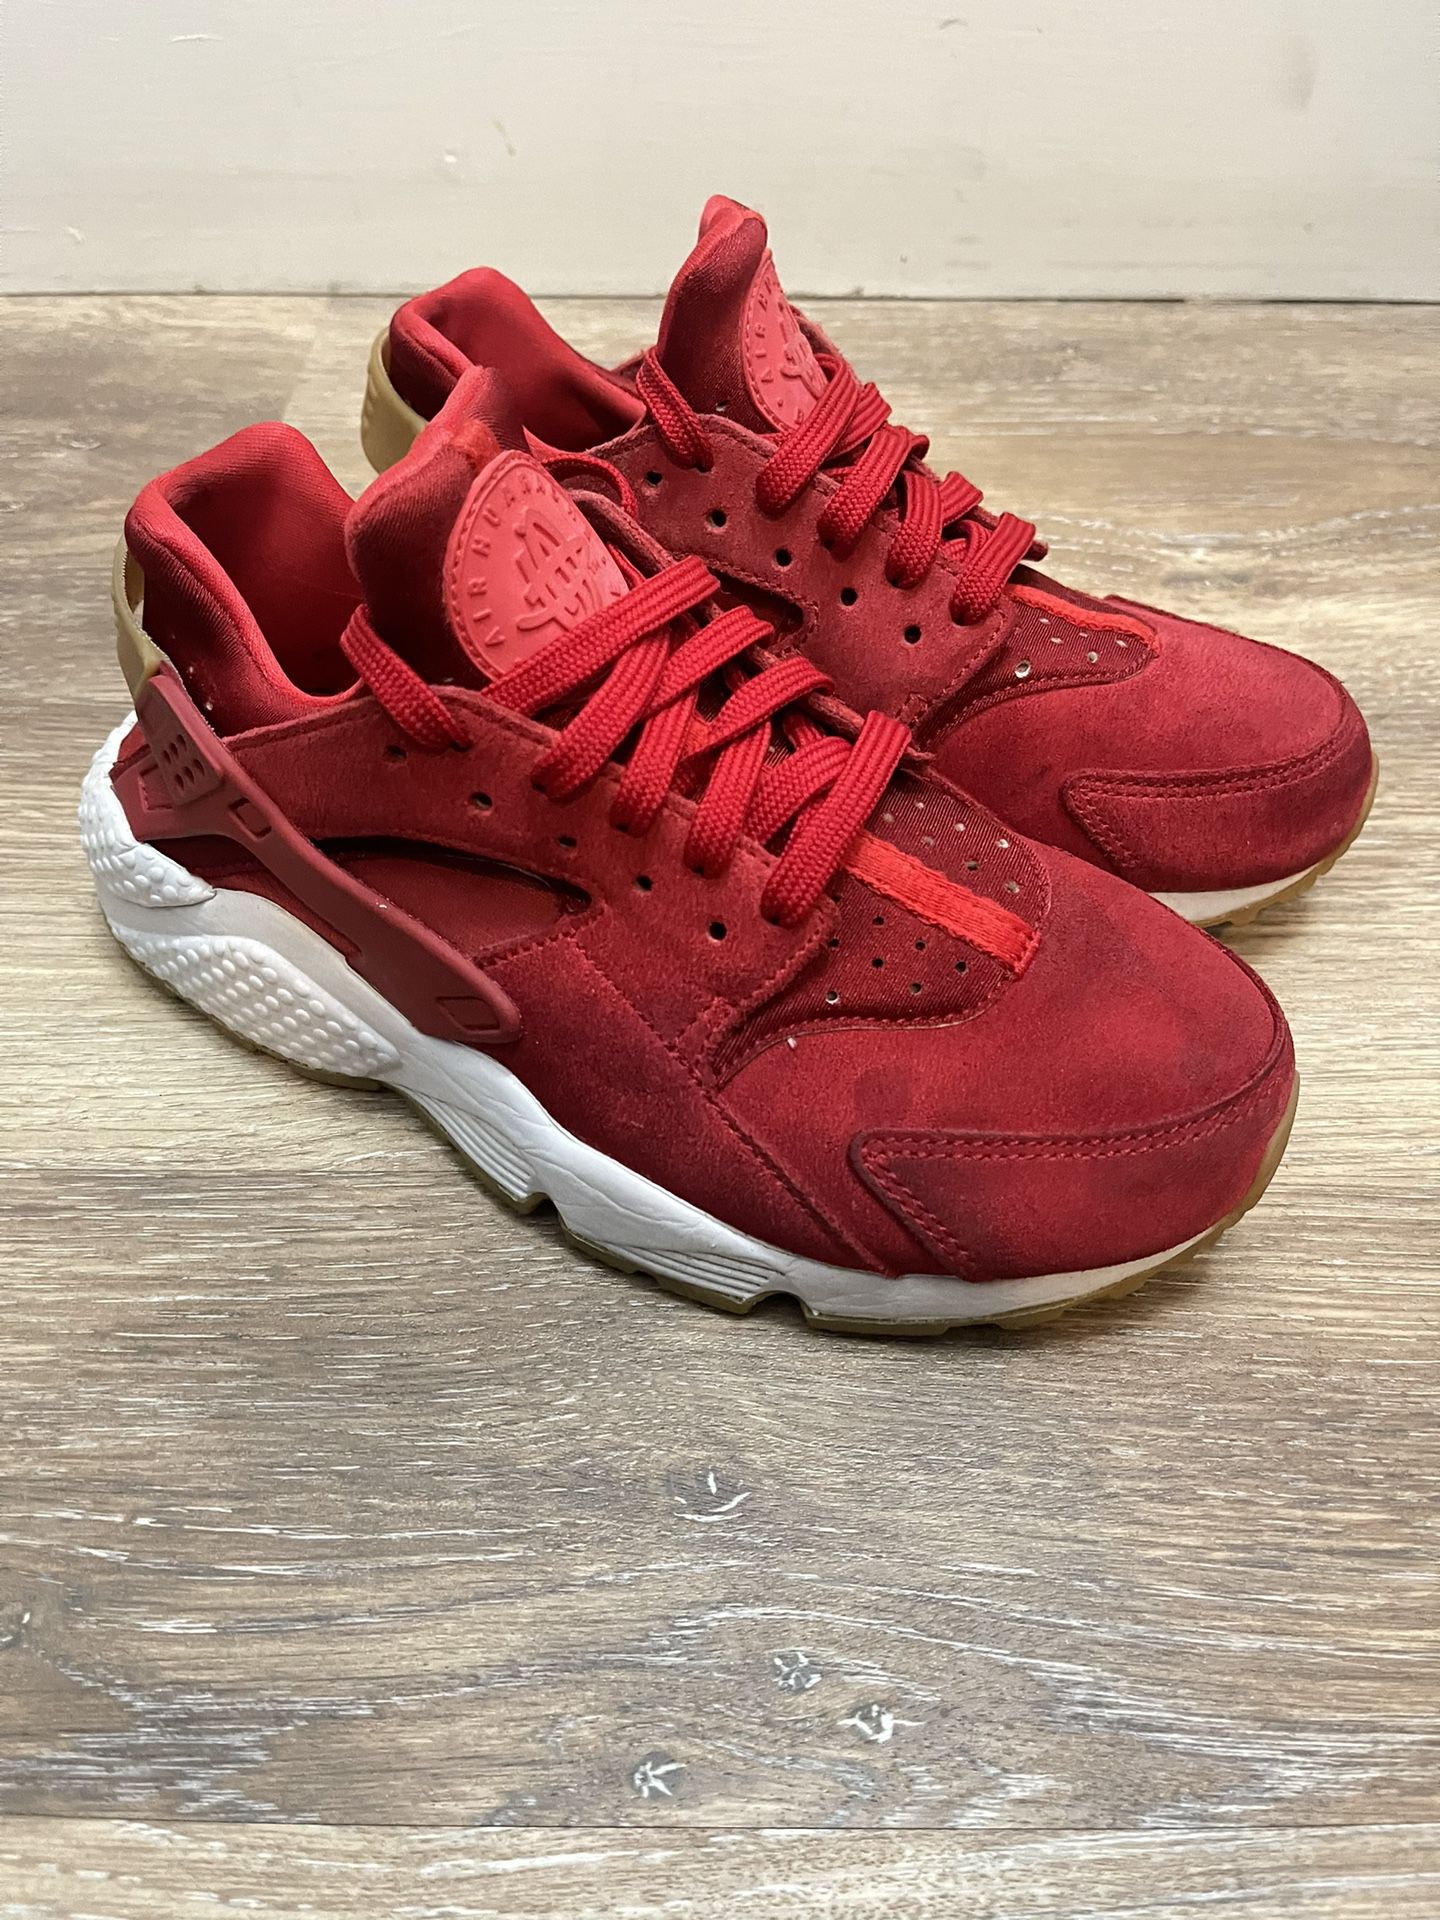 pistola polilla pasos Nike Air Huarache SD Running Shoes Gym Red Gum White AA0524-601 for Sale in  Los Angeles, CA - OfferUp